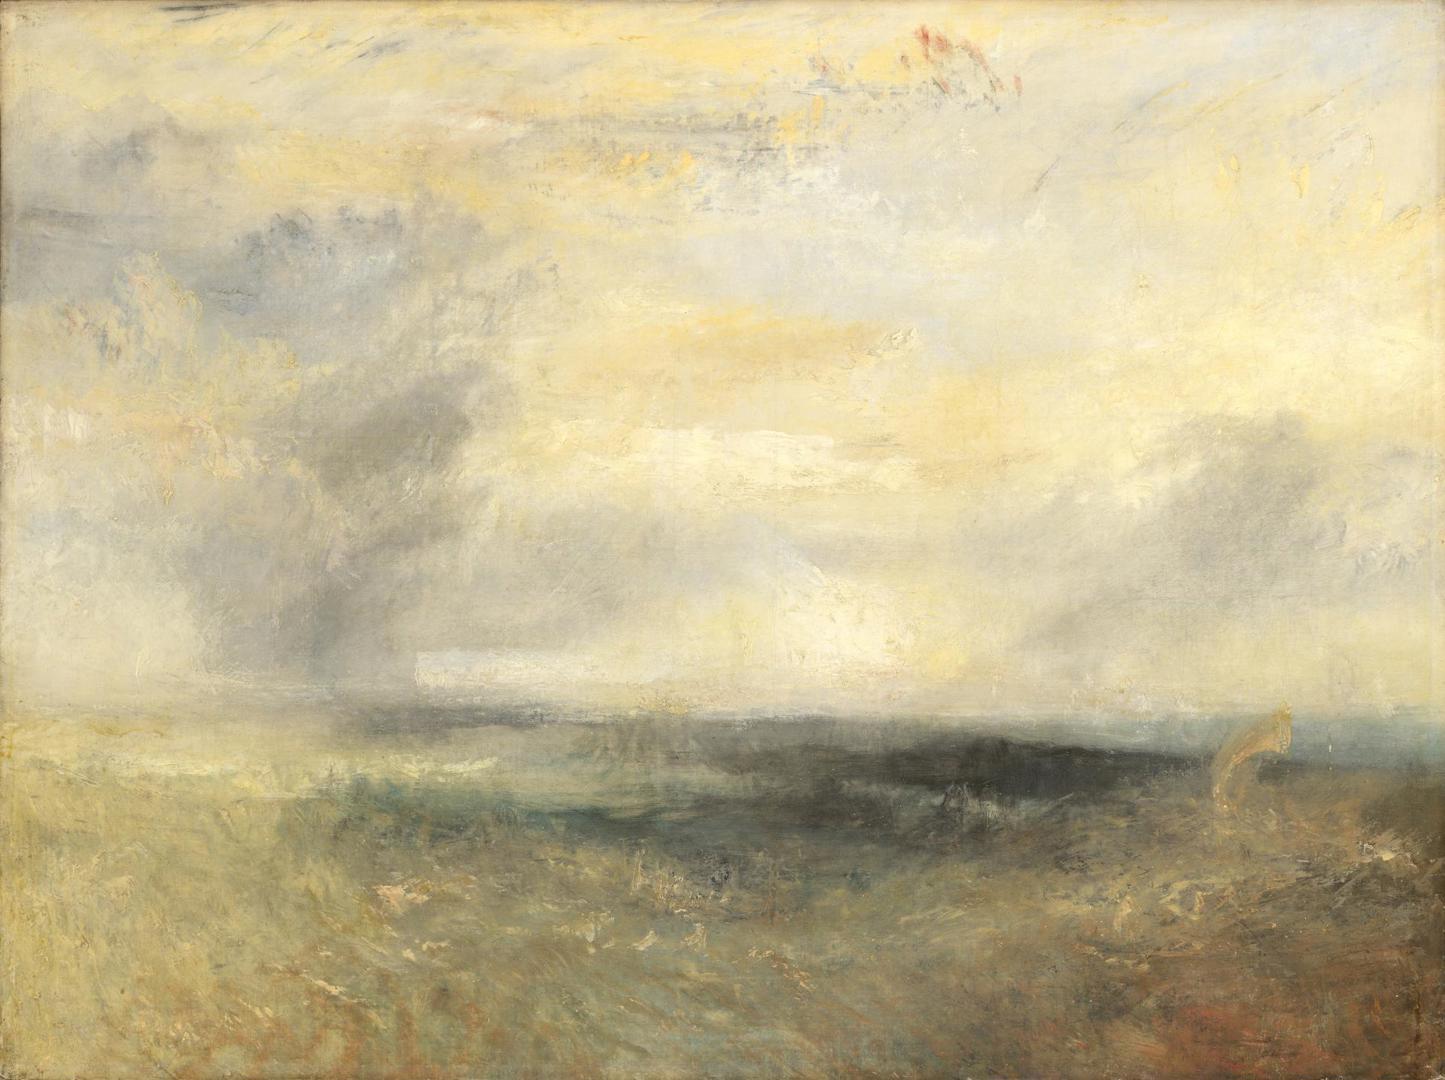 Margate (?), from the Sea by Joseph Mallord William Turner